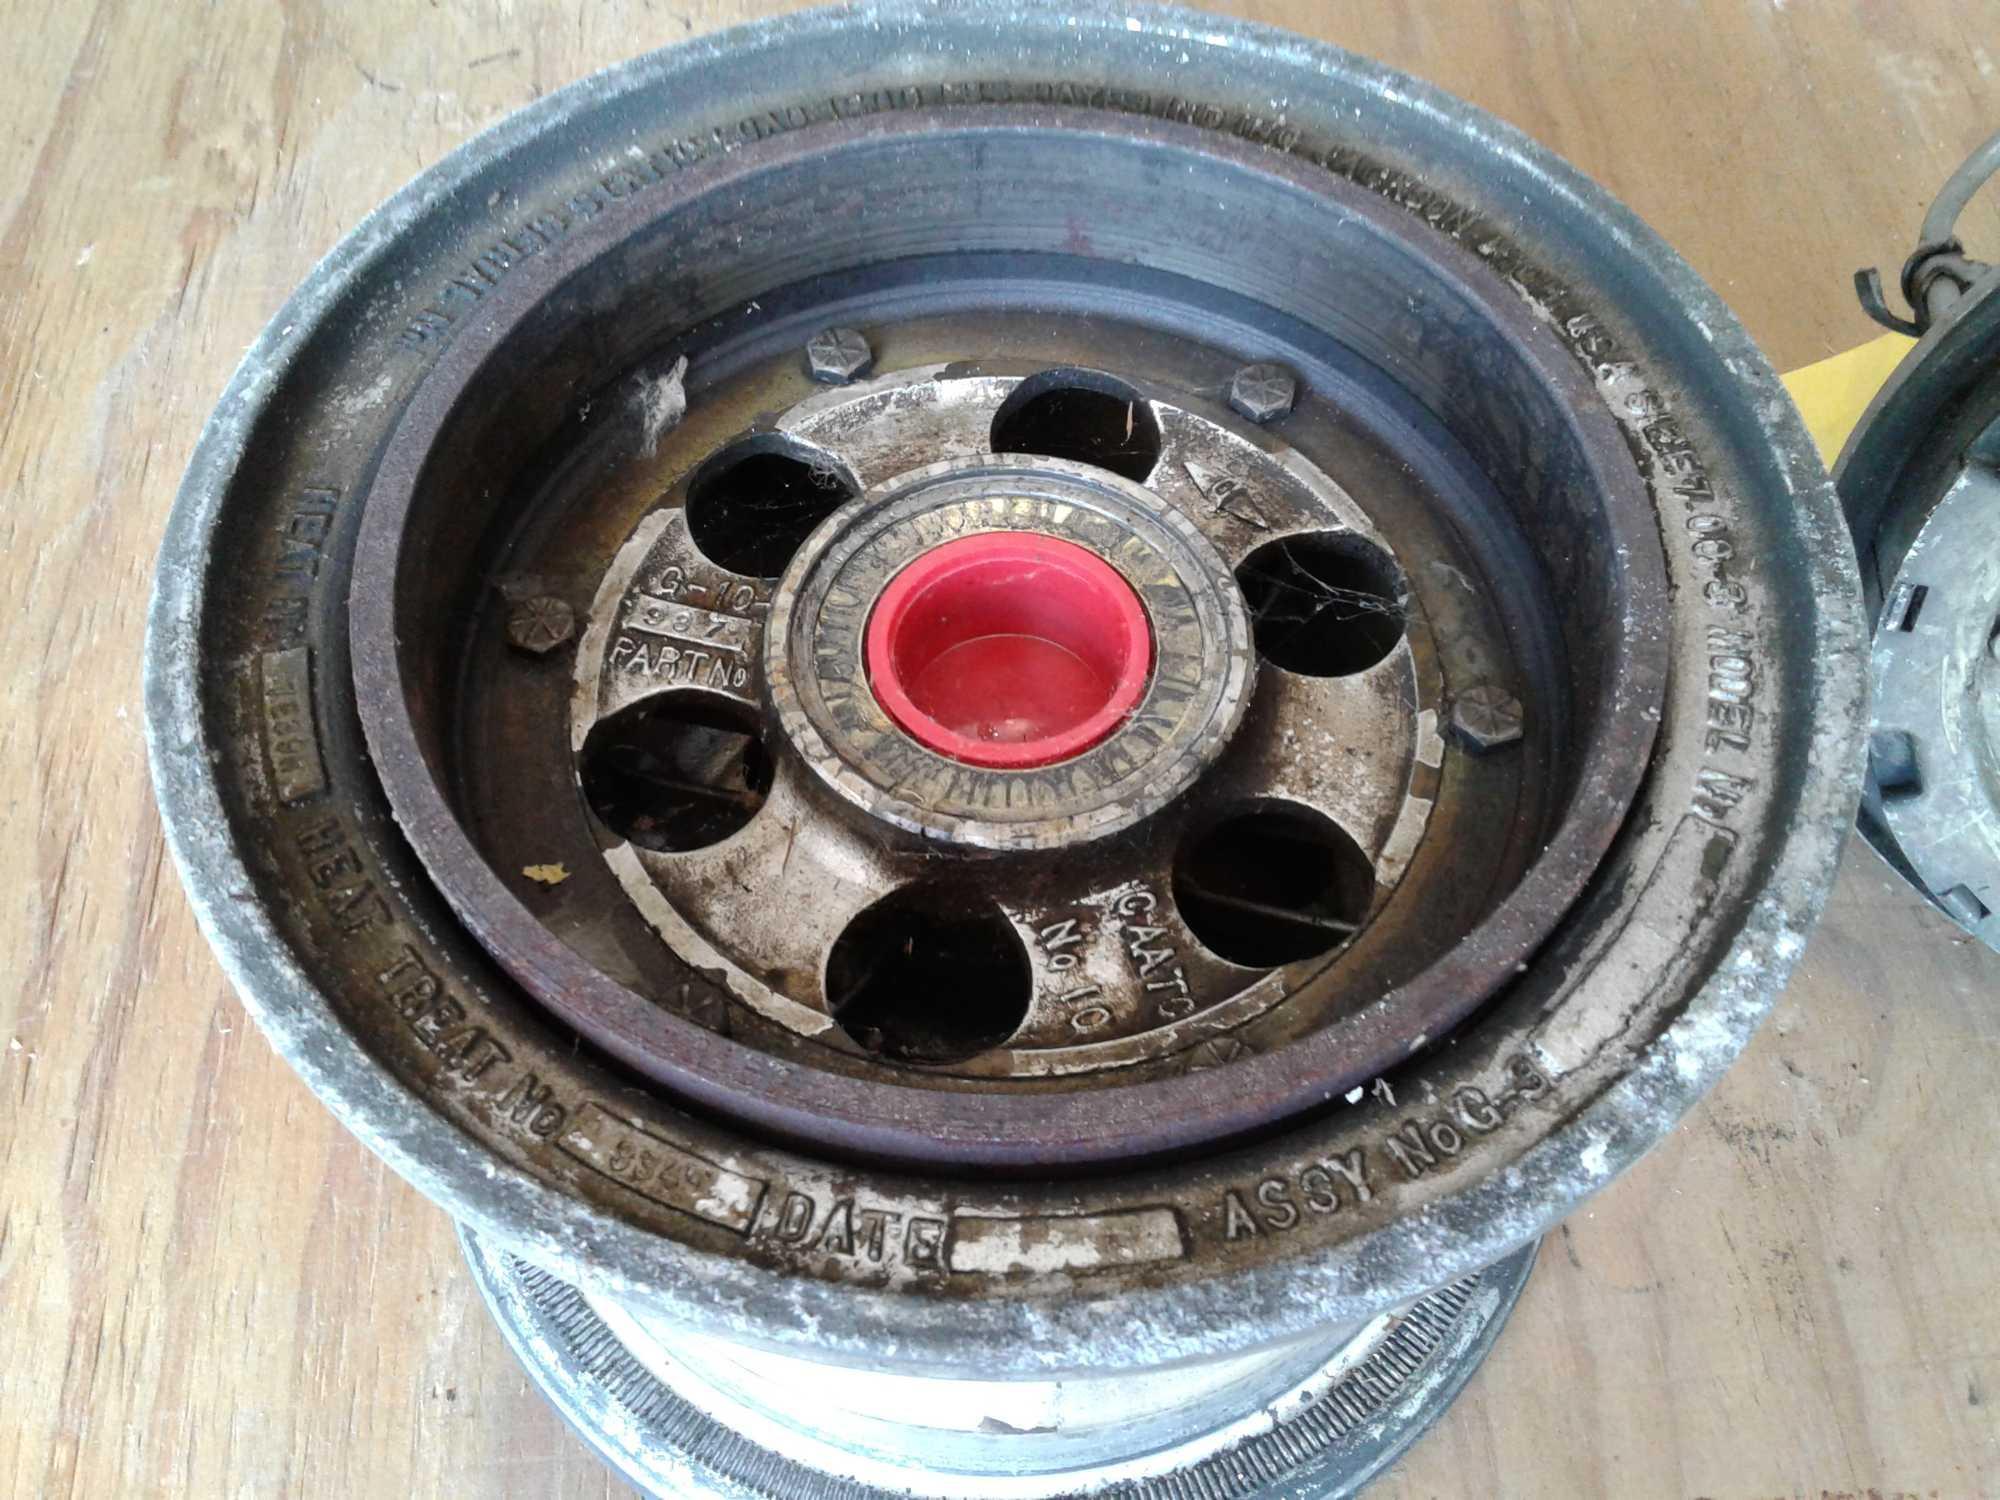 HAYES 7.00-8 WHEELS , (1) WITH EXPANDER BRAKE (SOME CORROSION)